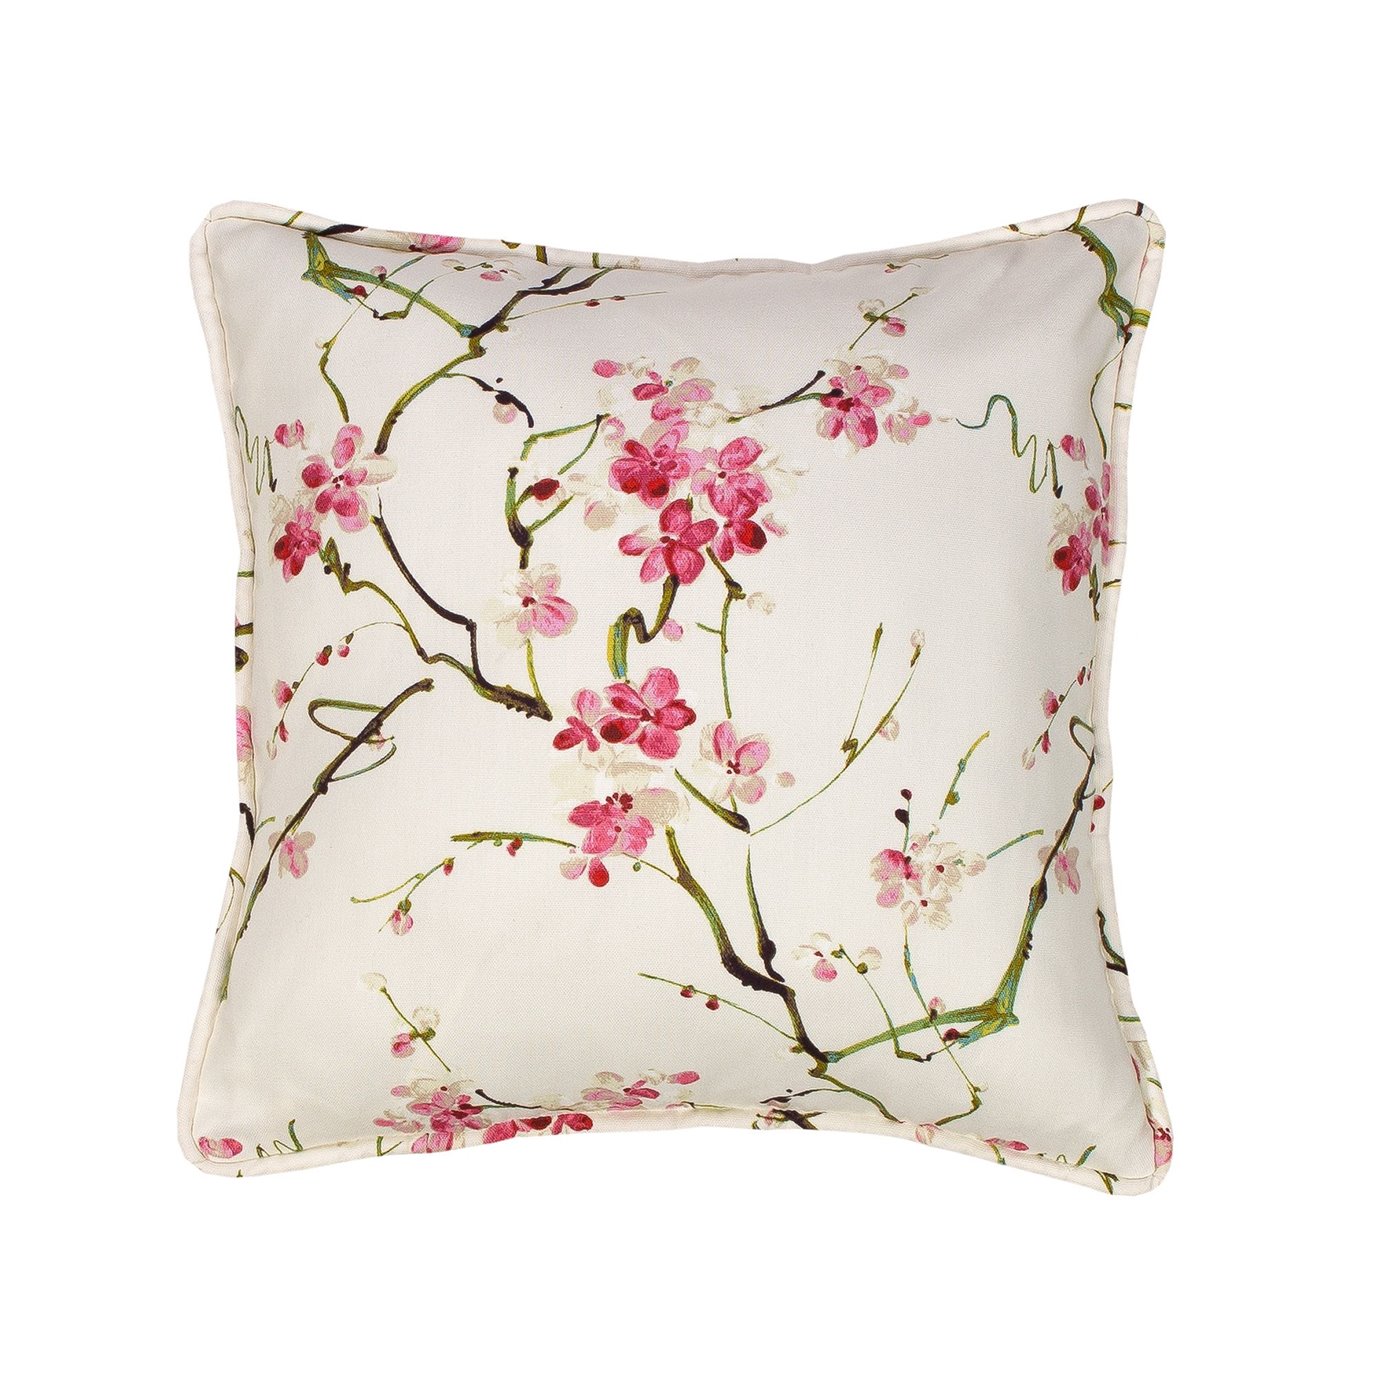 Cherry Blossom Square Pillow - Floral